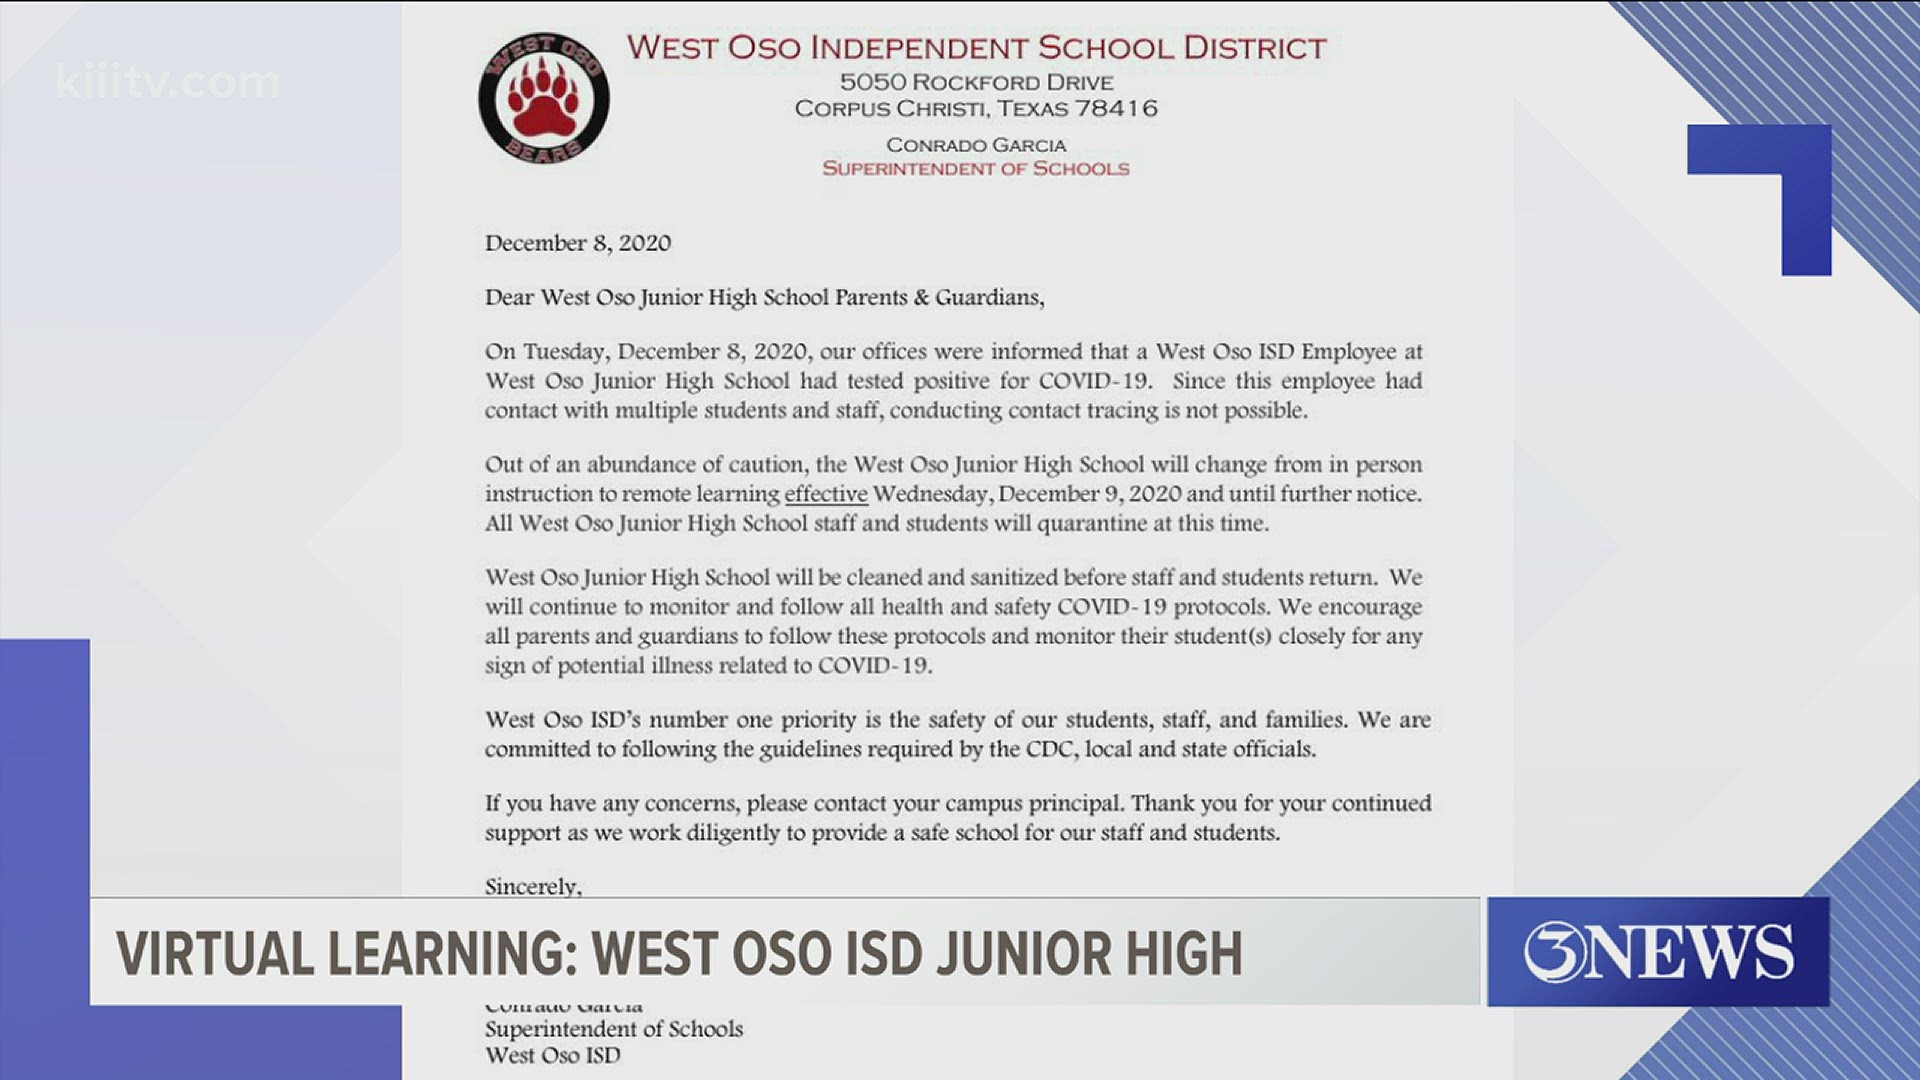 All students and staff at West Oso Junior High are in quarantine at this time.